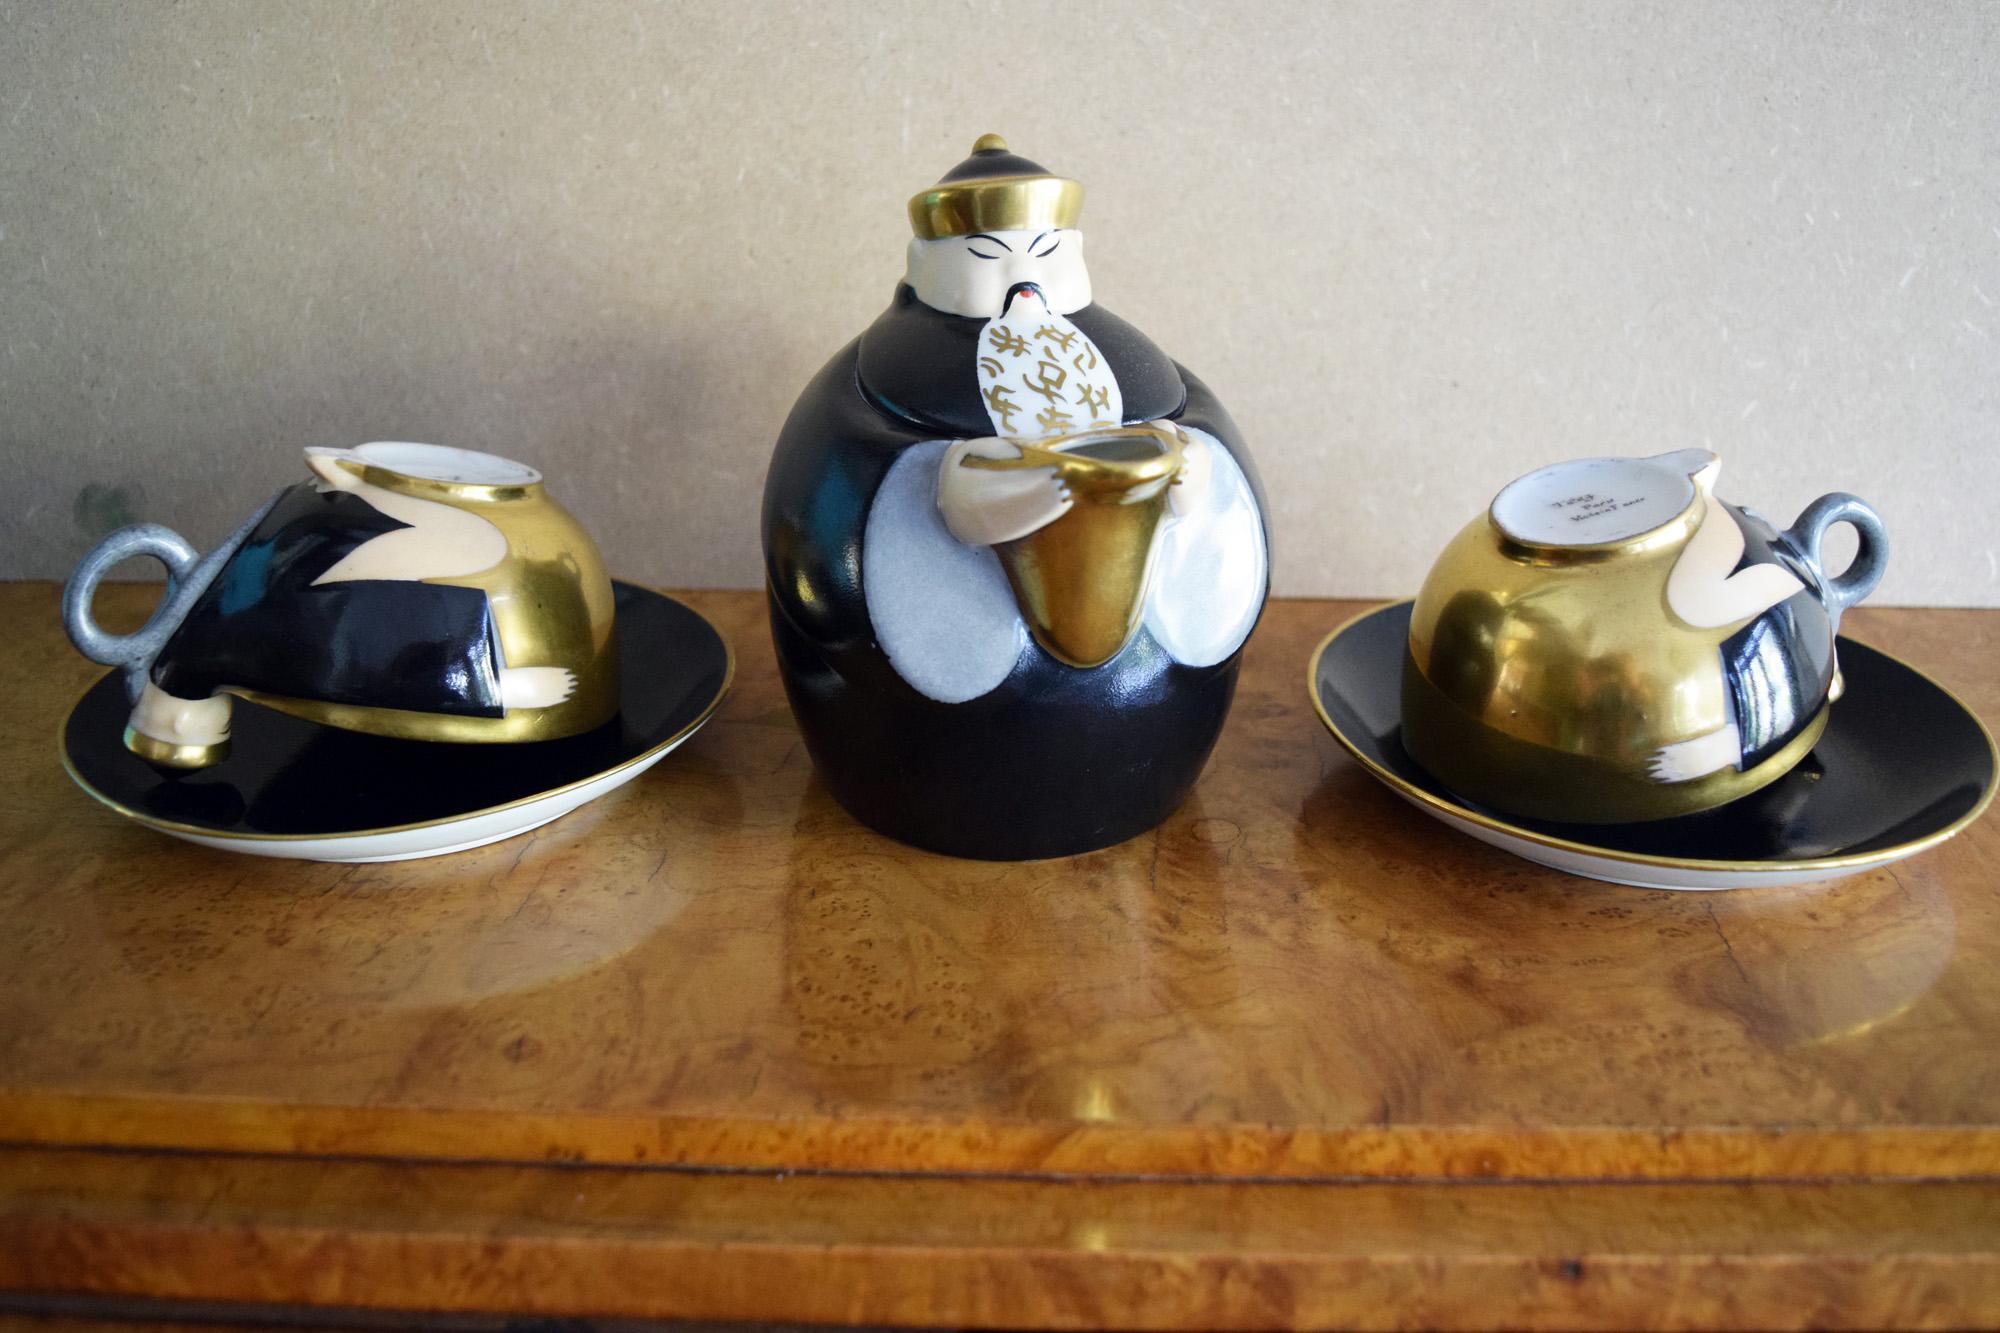 Robj porcelaine Chinese character bachelor tea set
A three piece rare tea set by Robj comprising a Chinese man as a tea pot  in navy blue wearing a gilt hat,  gilt spout. There are two cups and saucers in navy blue ,gold and white depicting two